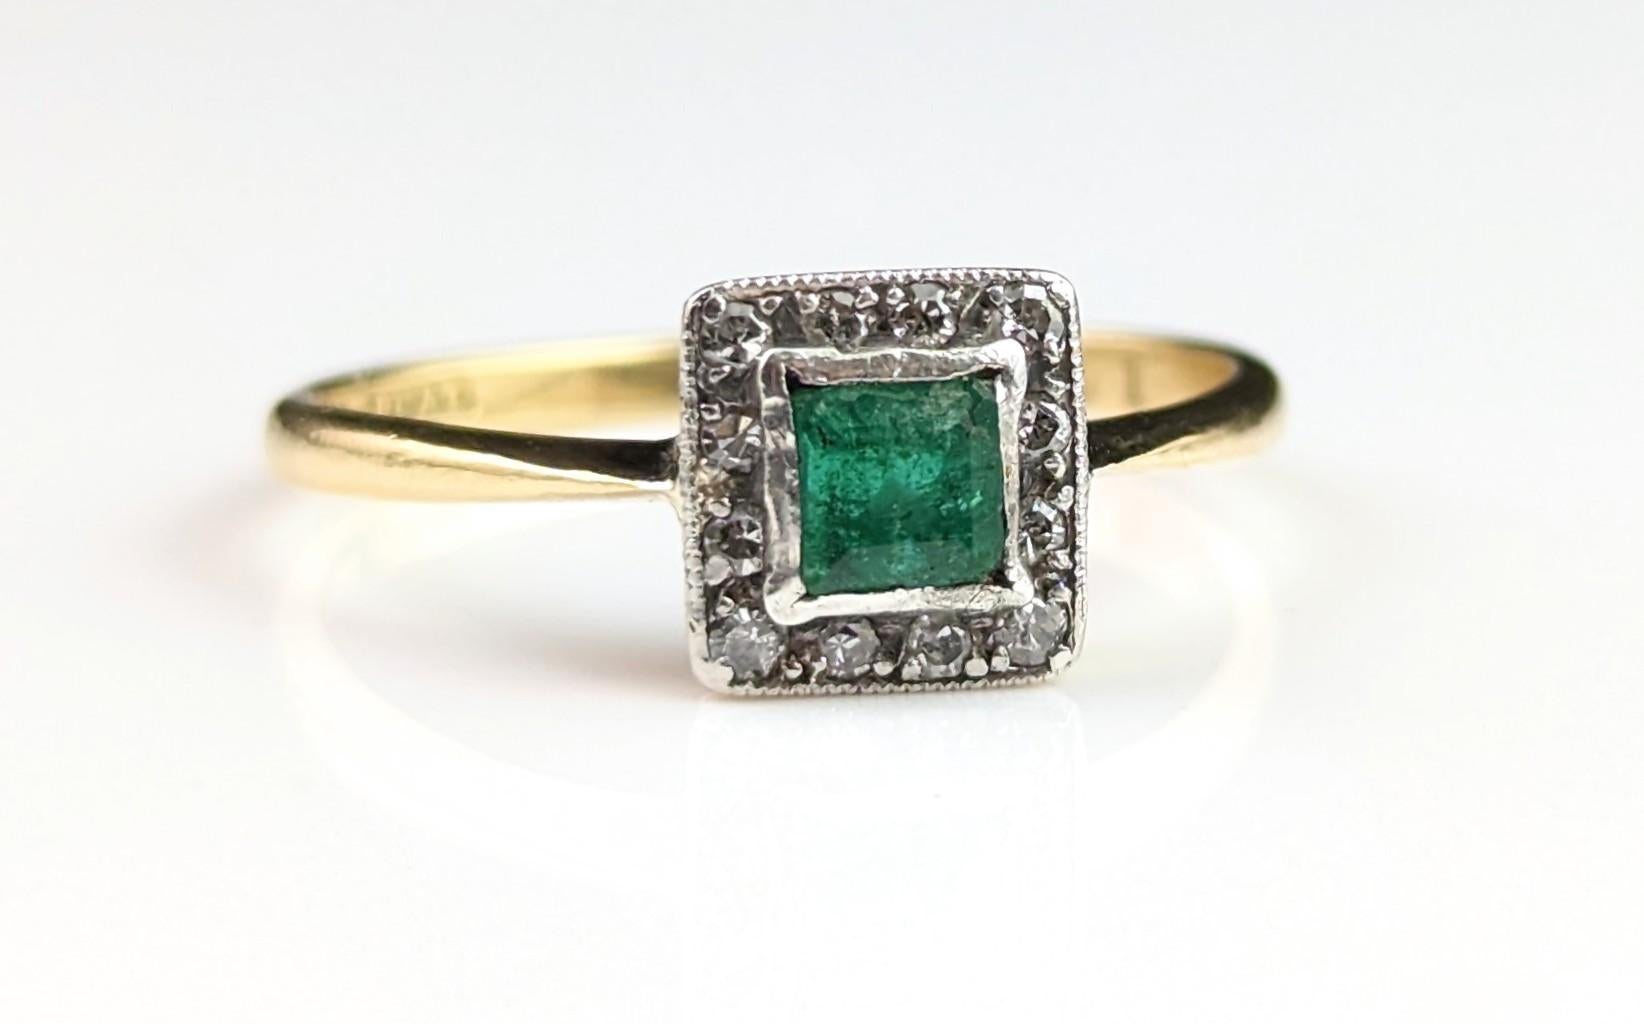 Vintage Art Deco Emerald and Diamond Ring, 18k Gold and Platinum 11